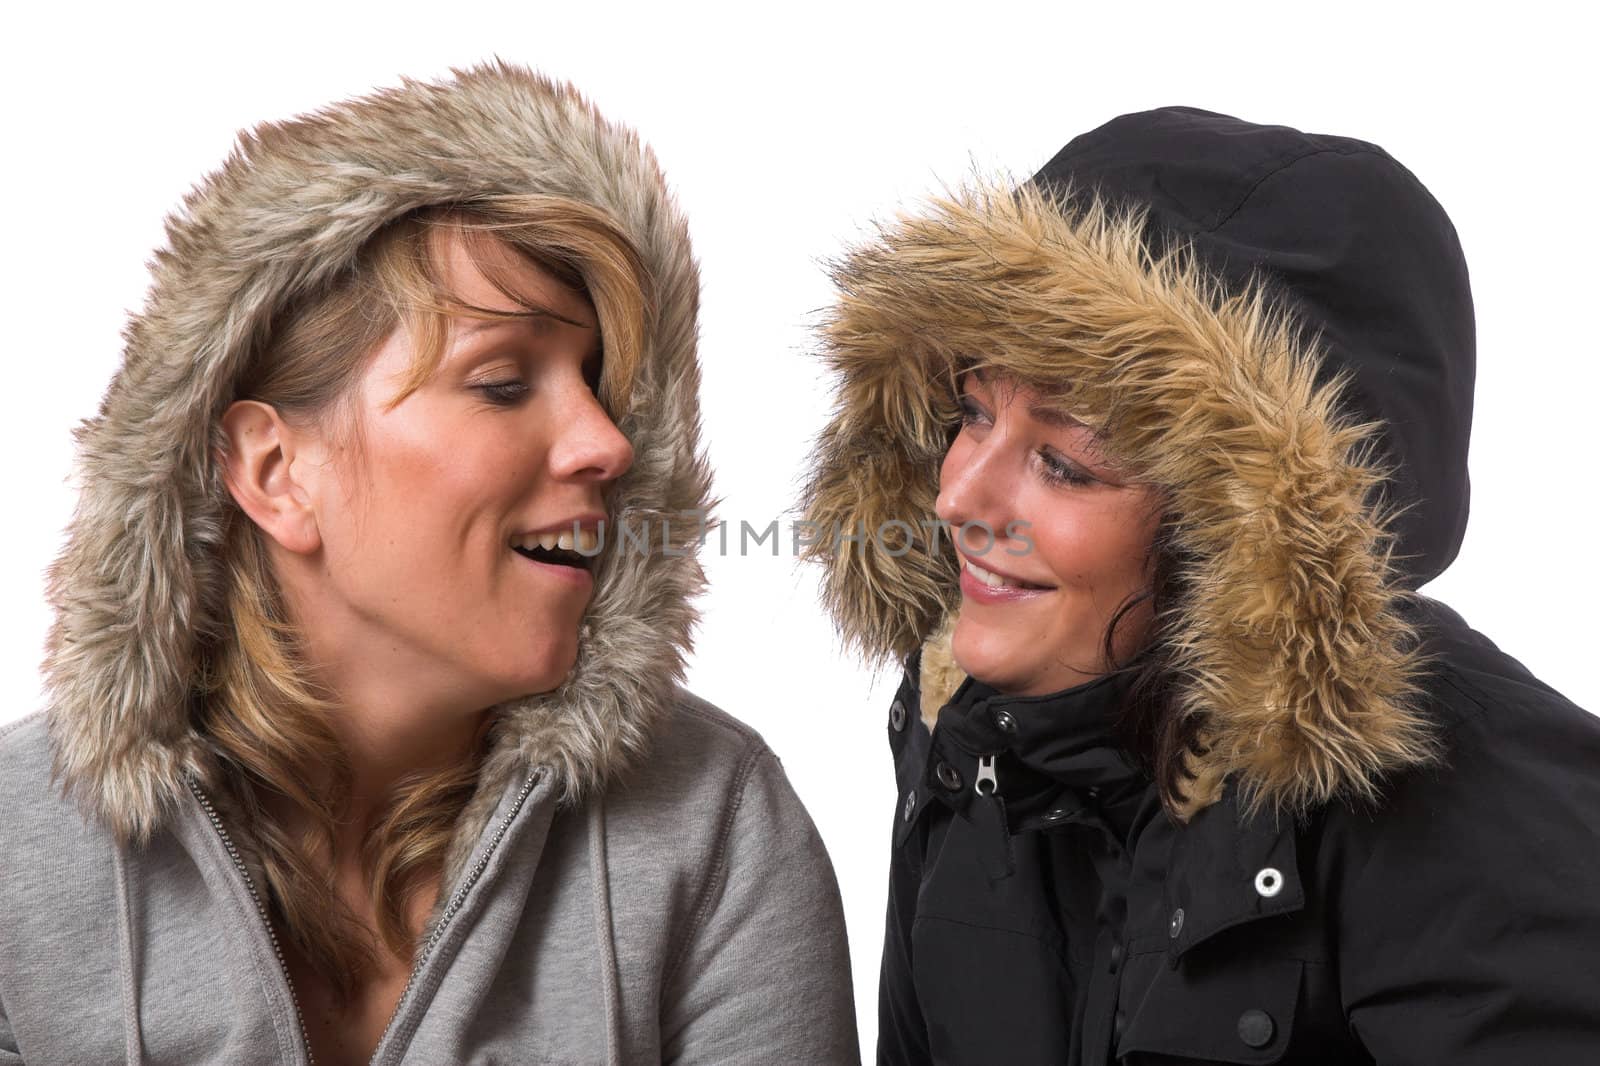 Two sisters wearing a winter downjacket and looking at eachother